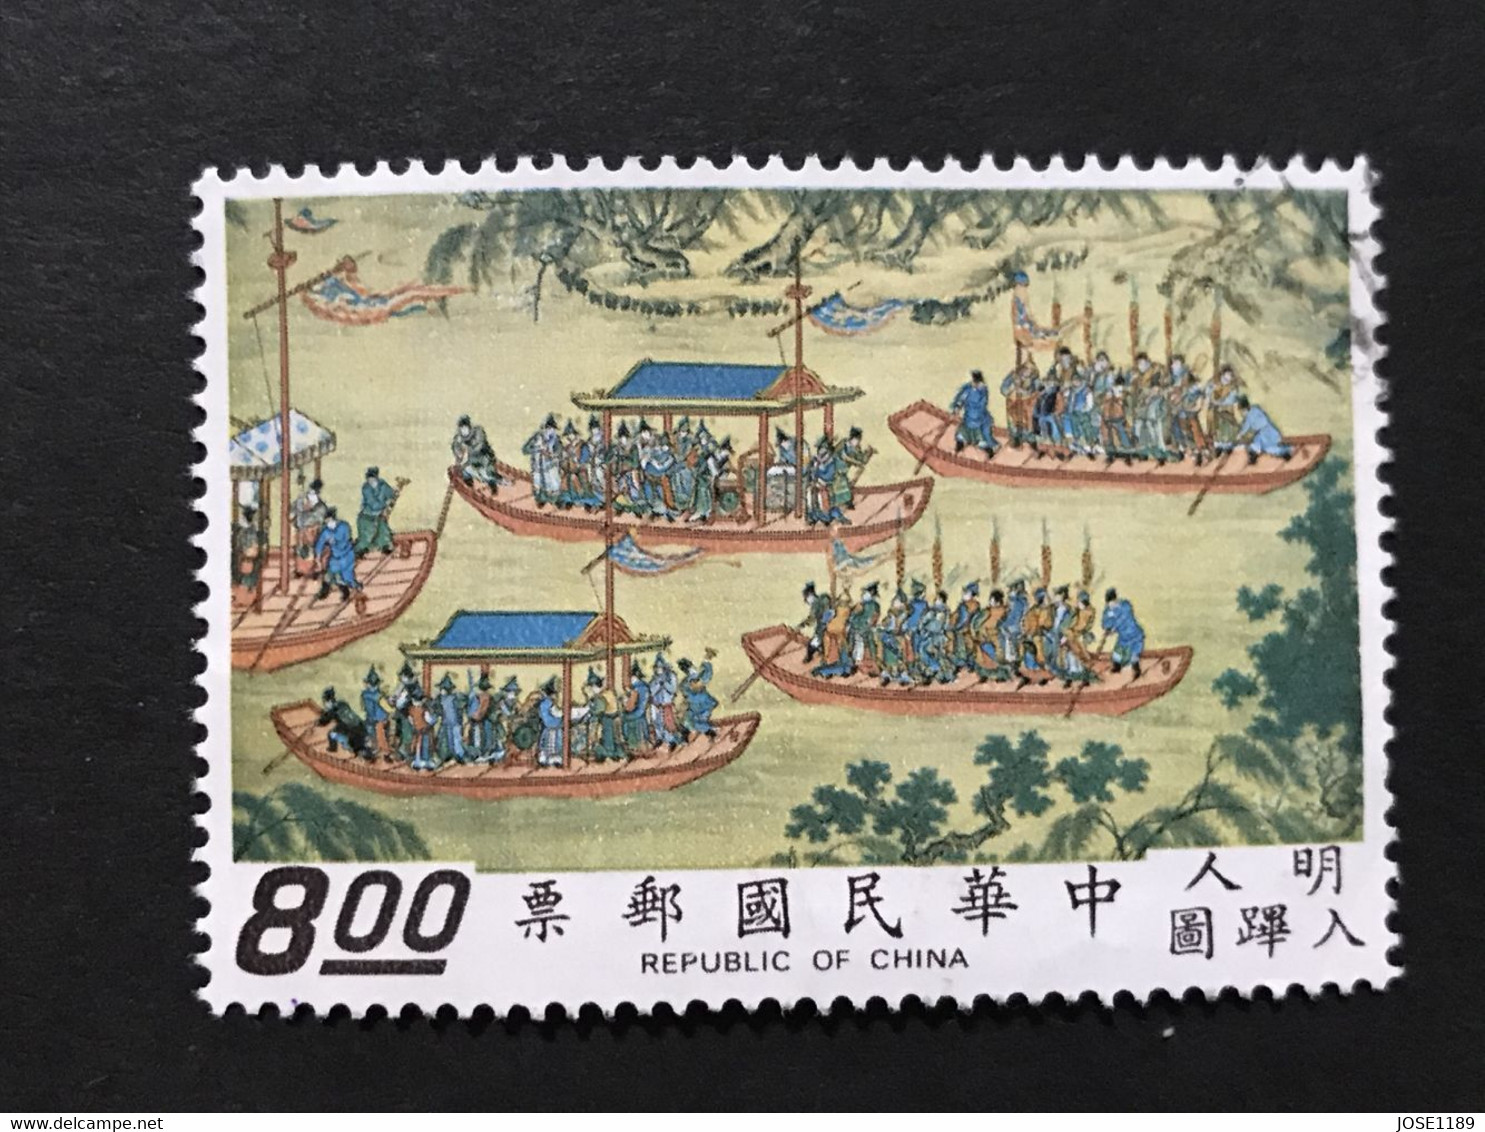 ◆◆◆Taiwán (Formosa) 1972   Emperor Shih-tsung’s  Procession  ,  Sc # 1783 ,   $8  USED  AB3058 - Used Stamps